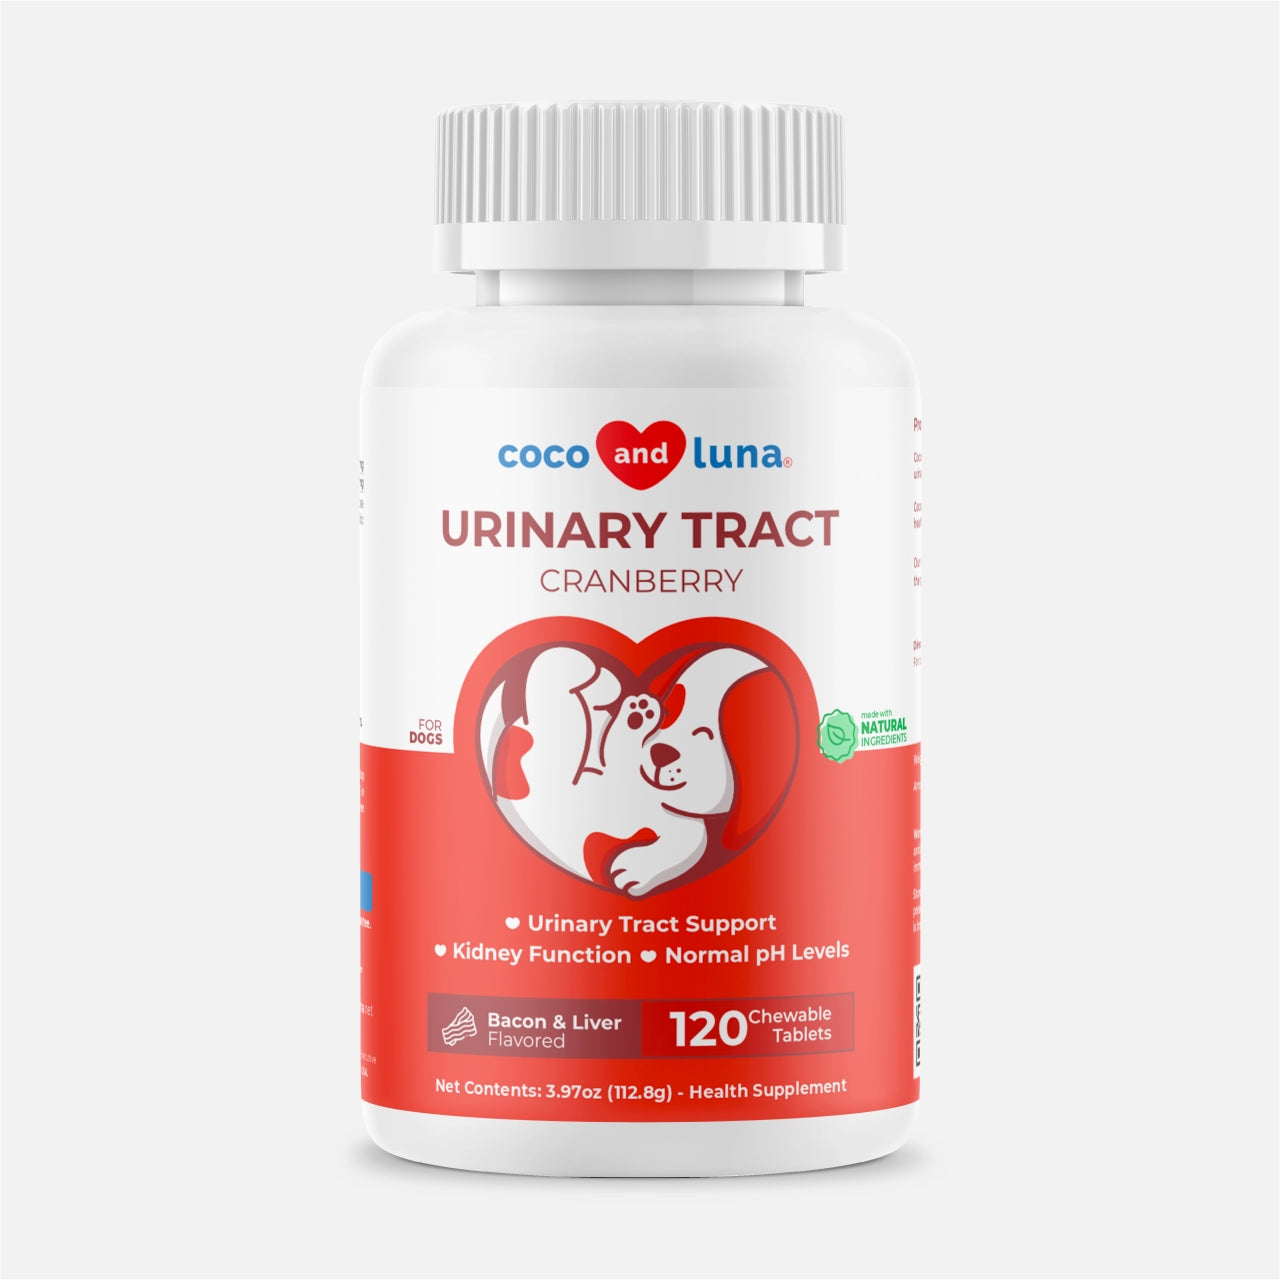 Urinary Tract Support for Dogs  - 120 Chewable Tablets - Coco and Luna